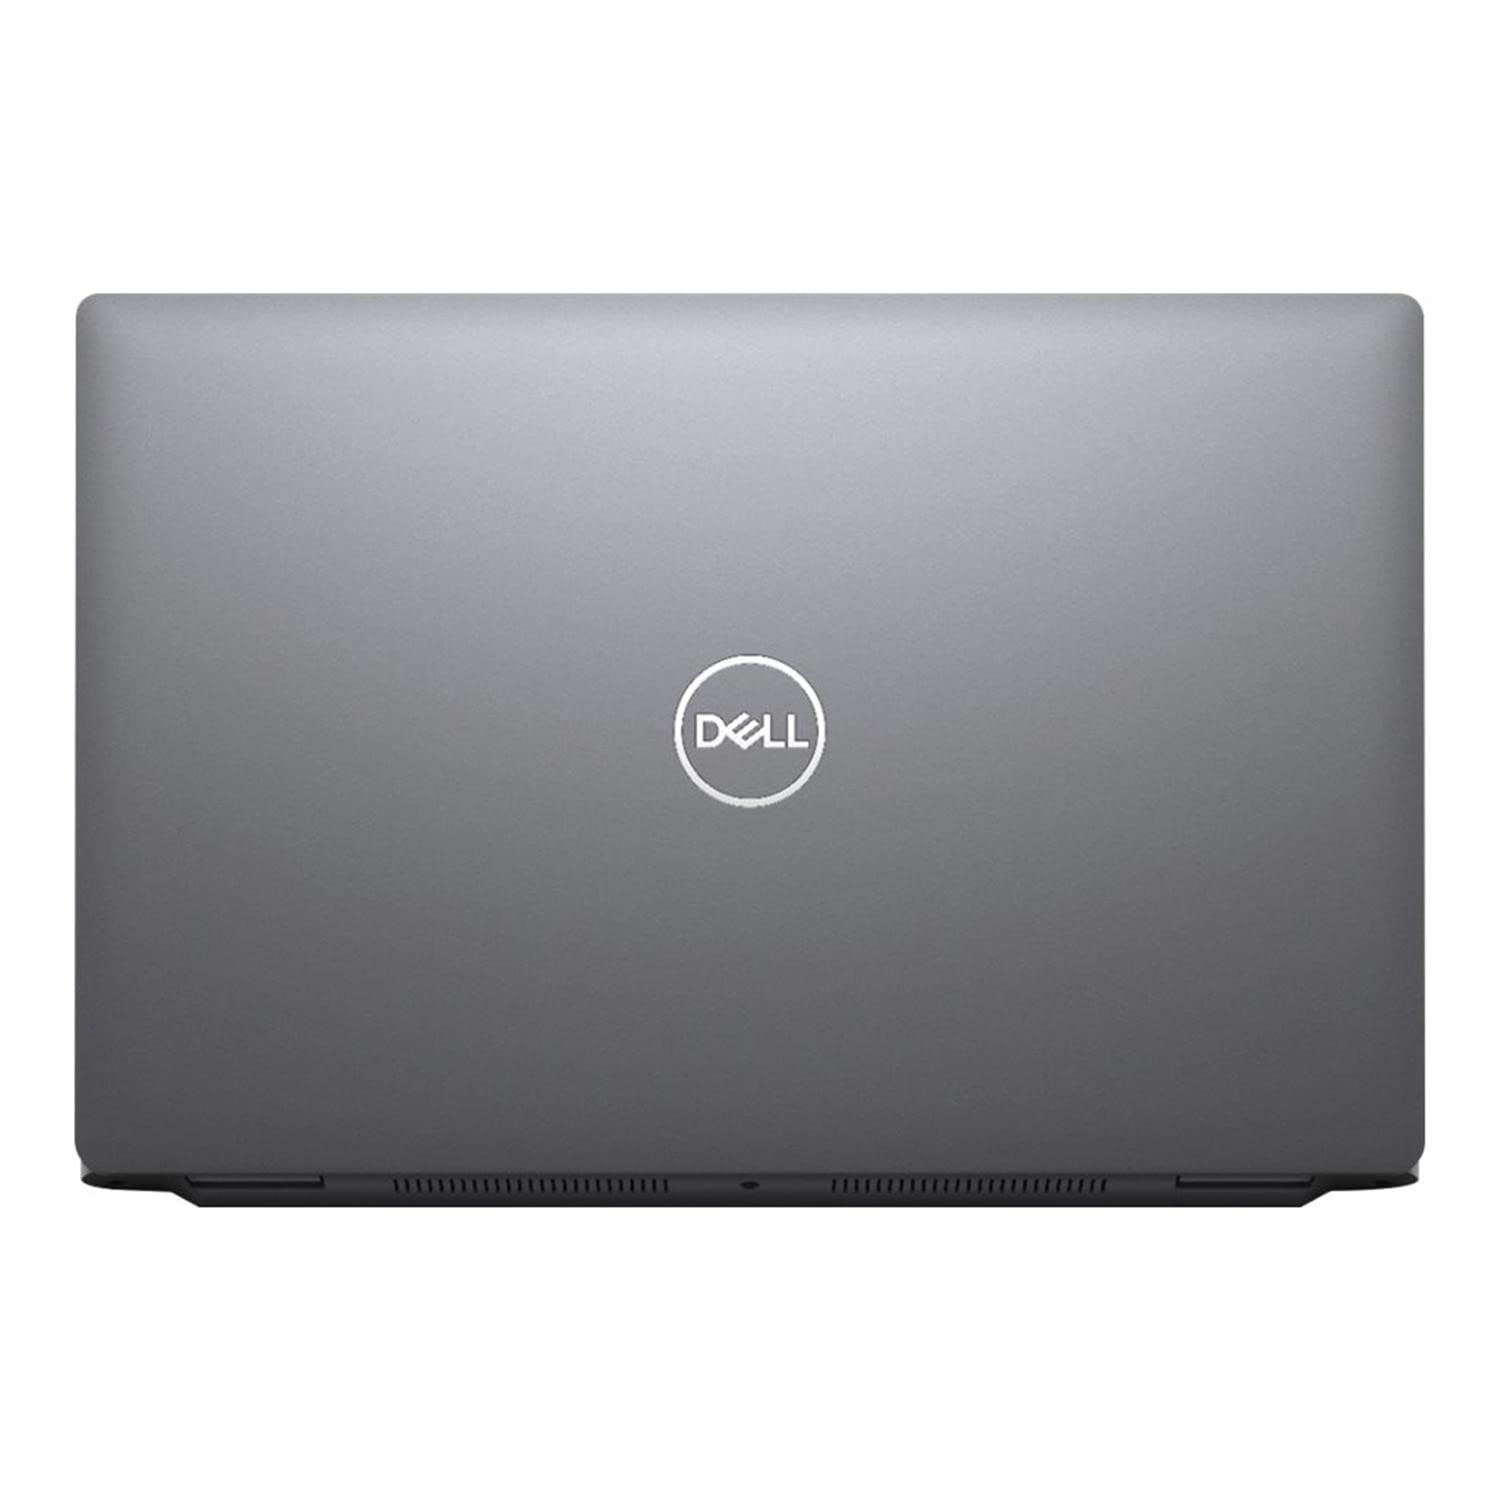 Dell Precision 3560 15.6" 2TB SSD Laptop - Core i7-1165G7 (4 Cores, 4.8GHz), Nvidia Quadro T500, 32GB DDR4, Smart Card Reader, WIFI 6 & BT 5.1, Free Upgrade to Windows 11 Pro, Backlit Keys (Renewed)